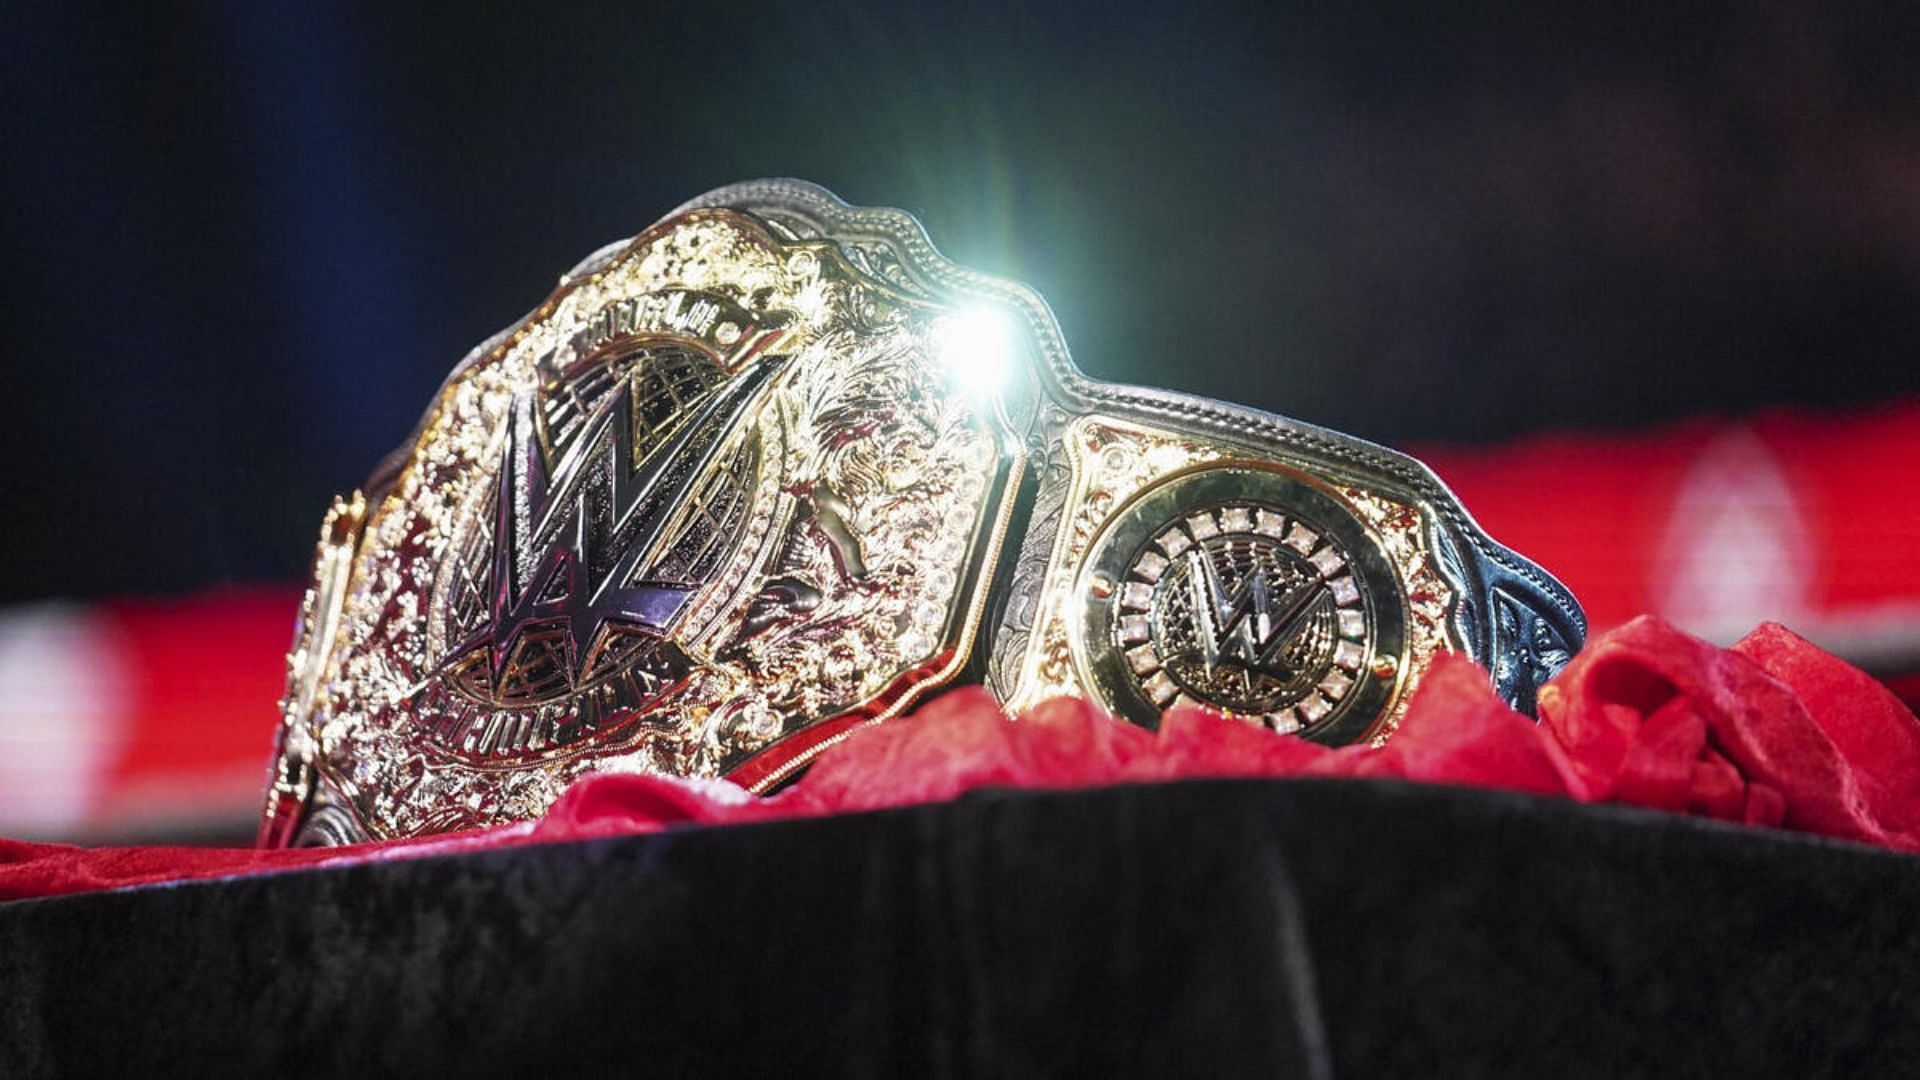 The World Heavyweight Championship is one of the biggest prizes in WWE [Photo courtesy of WWE